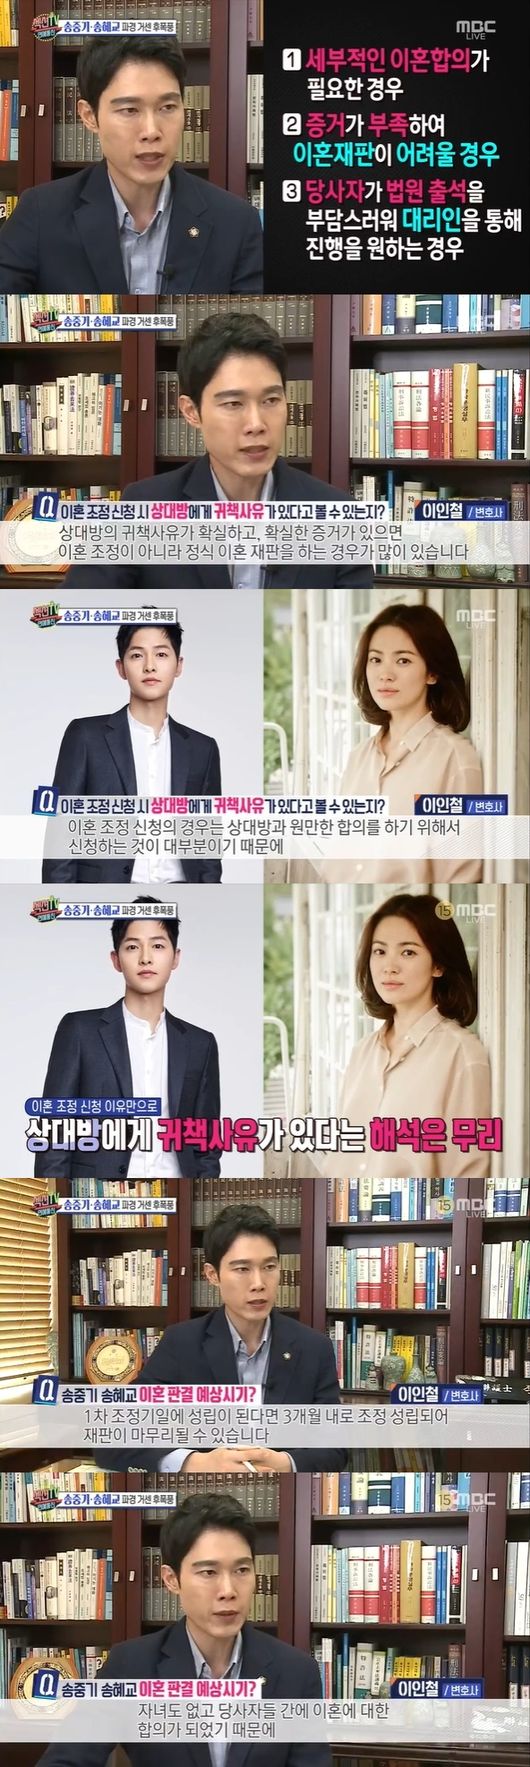 The news of the divorce of Song Jung Ki and Song Hye Kyo was announced, and Song Hye Kyos banners and photographs disappeared from Song Jung Kis Daejeon home.MBC Section TV Entertainment Communication broadcast on the afternoon of the afternoon reported on the application for divorce mediation of Song Jung Ki and Song Hye Kyo.On June 27, Song Joong-ki and Song Hye-kyo were shocked by the news that they had entered the divorce settlement process.Song Joong-ki first made an official position, saying that he applied for divorce mediation against Song Hye-kyo through a legal representative, and there were various speculations about the reason for the divorce.The two companies said they would respond hard to speculative malicious rumors.Lee In-cheol, a lawyer, said, There are three major applications for divorce mediation. If there is a lack of evidence and divorce trial is difficult, the party is burdened with court attendance. He said.If there is certain evidence that the other party is responsible for the other party, there are many cases where a formal divorce trial is not a divorce mediation.In the case of divorce mediation, most of them apply for amicable agreement with the other party. It is unreasonable to interpret that there is a reason for the other partys divorce mediation application. Regarding the expected timing of the divorce, If it is established on the first adjustment date, it can be adjusted within three months and the trial can be completed.I do not have children, and I have agreed on divorce between the parties, so I expect that it will be agreed smoothly in the divorce settlement process between three and six months. The day after the divorce news, Song Joong-kis father reported that he had removed Song Hye-kyos photo from Daejeons main house, which was decorated and managed in the form of a museum.The production team of Section TV found Daejeon to confirm the facts, and there were banners of works hanging around Song Joong-kis main house, while Song Hye-kyos banners hanging earlier this year were gone.In addition, the inside of the house where the marriage photos of Sun Generation and Song Jung Ki and Song Hye Kyo were displayed was locked.The production team asked, When did you get Song Hye-kyos picture, when did you get it off? and the residents replied, I removed the photo immediately the next day (after the divorce news).Taebaek city of Gangwon was also in a difficult situation in the news of the divorce of Song Jung Ki and Song Hye Kyo.KBS2 Drama Dawn of the Sun, which is a filming site, has been promoting various tourism projects with more than 200 million won, and it was scheduled to hold Taebaek Couple Festival for the third time this year, but canceled the event due to divorce of two people.The nearby merchants said, I tried to do a festival, but it was canceled because I broke up, and Yesterday, many people came and went today.I came to see a lot of them before the sculpture (such as the statues of two people) disappeared. The field manager said, I could not remove the filming site and I took off all the pictures of Song Joong-ki Song Hye-kyo.But the post-war park is planned to remain.An official of Taebaek city said, Since the motif of Dawn of the Sun is to install and operate Present Park and Drama set, there is no plan to remove the song couple because it is separated.We will continue to operate all the facilities. Meanwhile, at the end of July, Song Jung Ki and Song Hye Kyo will be the first divorce mediation.Section TV Entertainment Communication captures the broadcast screen